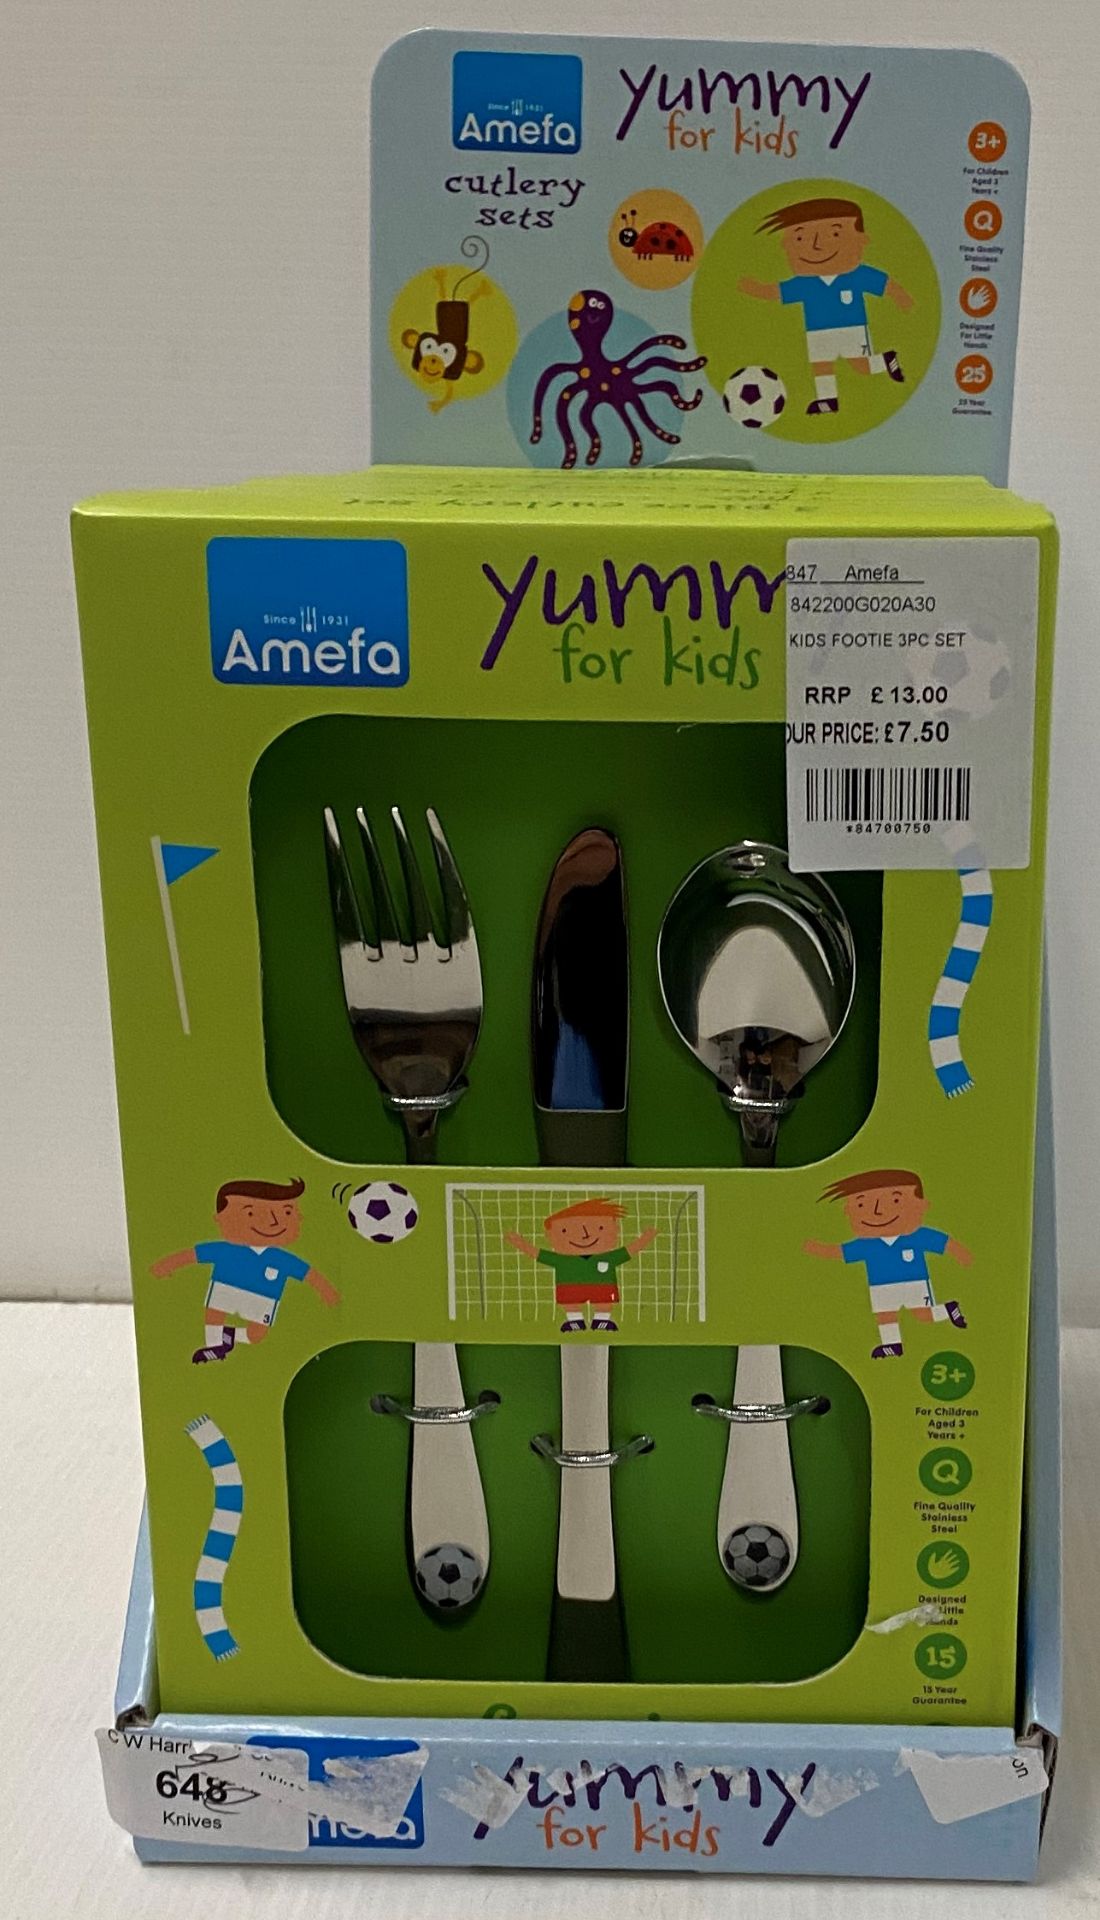 10 x Yummy for Kids - Footie - 3 piece cutlery sets RRP £13.